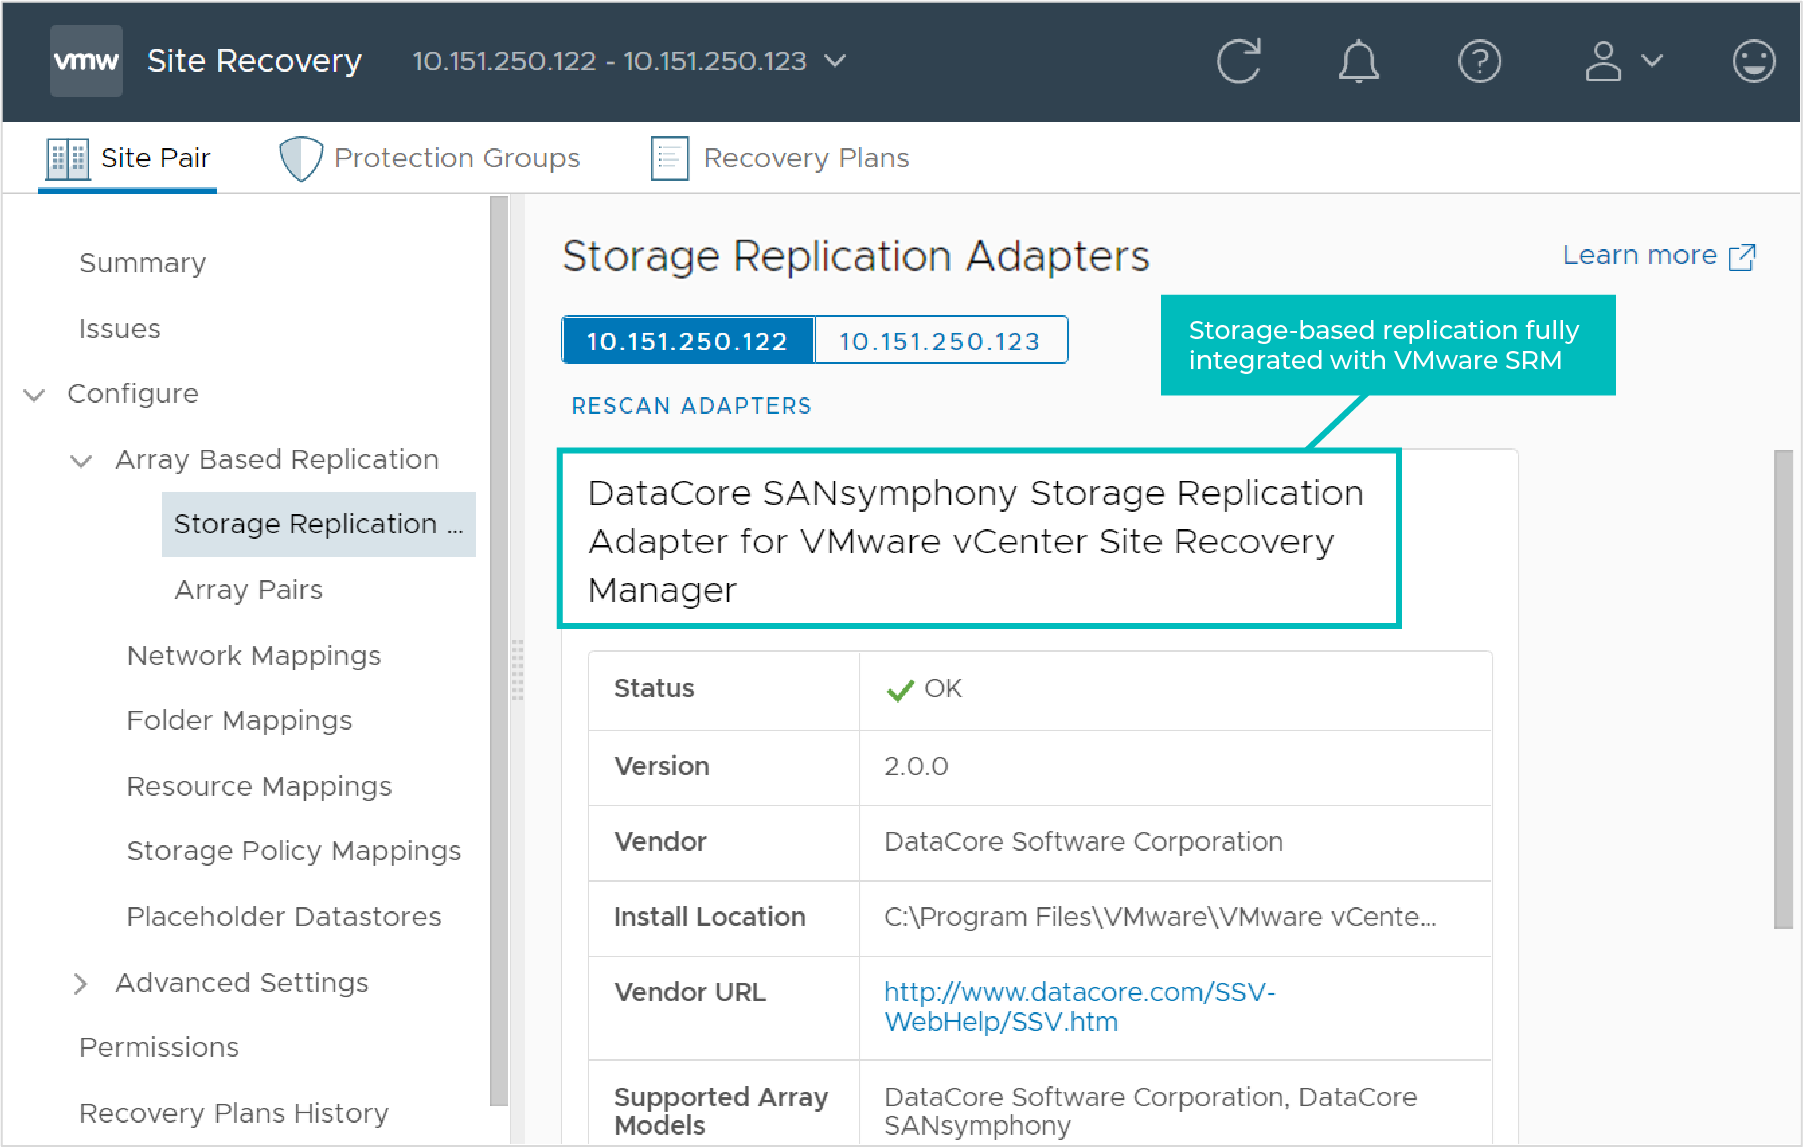 Storage Replication Adapter (SRA) per Site Recovery Manager (SRM)